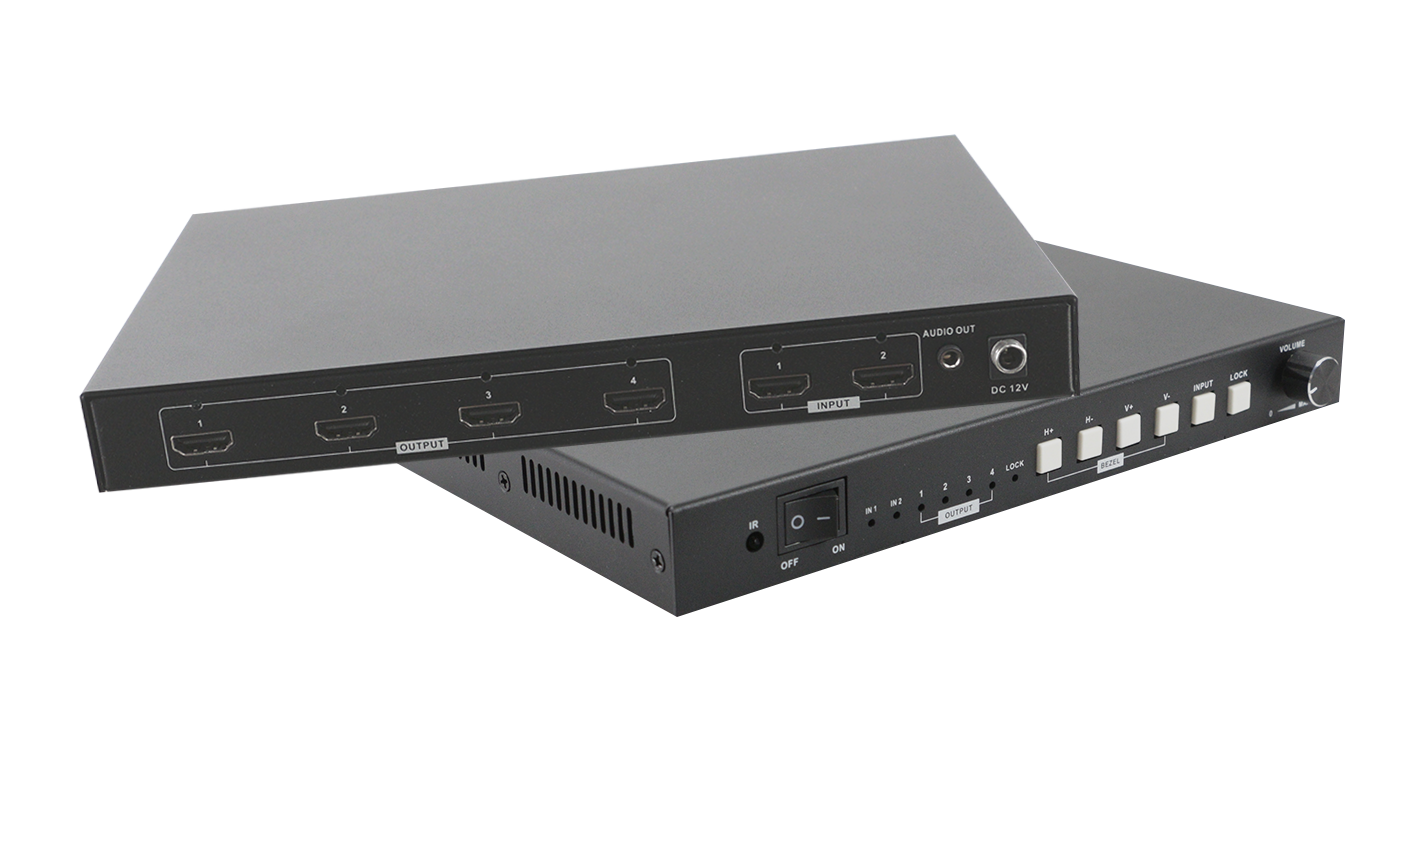 What is a 4K60 Video wall controller? What are the functions of 4K60 Video wall controller?